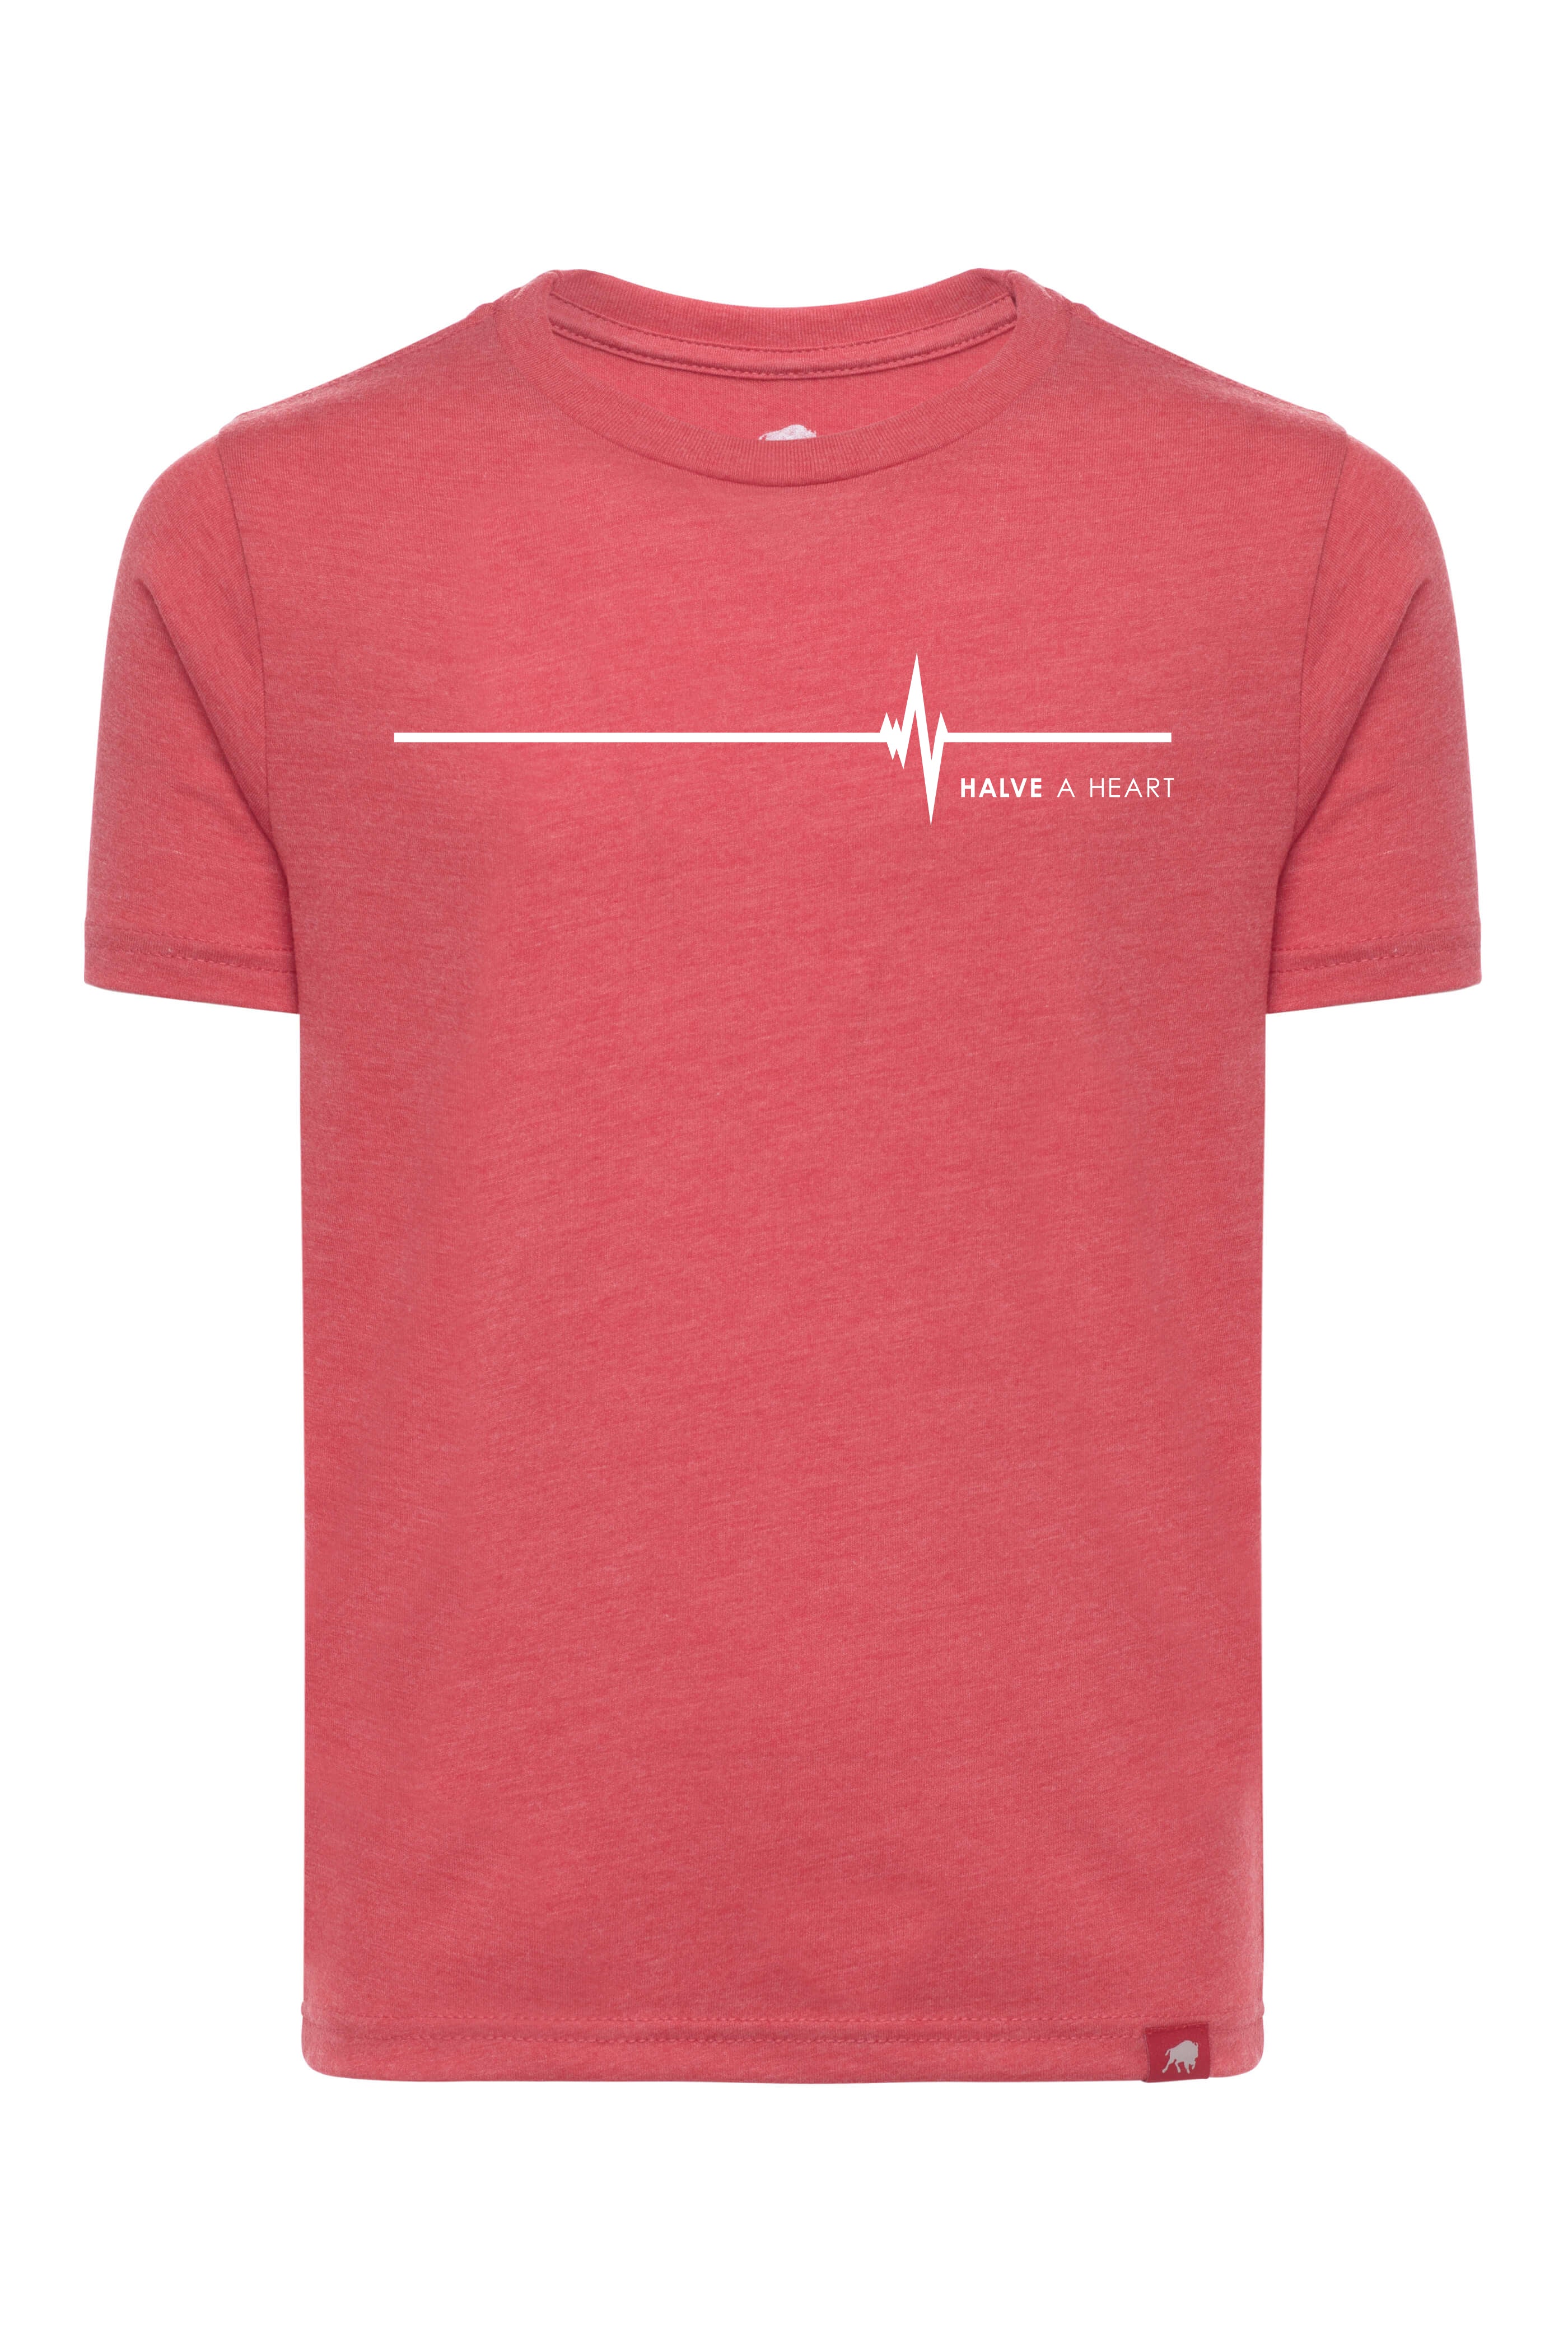 HALVE A HEART RED YOUTH COMFY TEE - Sportiqe Apparel 